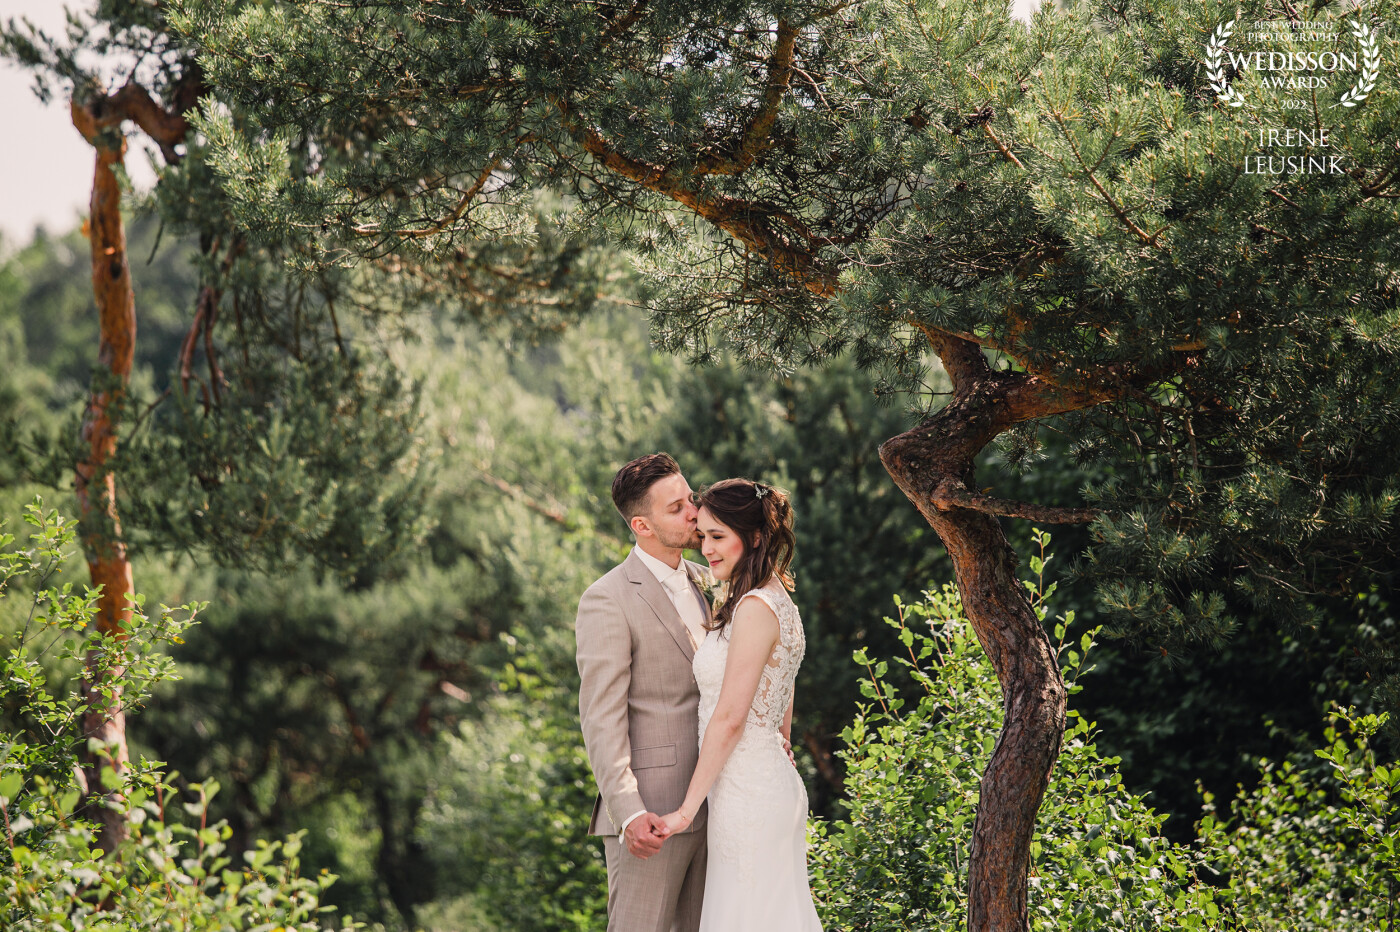 So much love not only between this couple, but also the family. Supplemented by beautiful locations, a relaxed setting, live music. An extraordinary day!